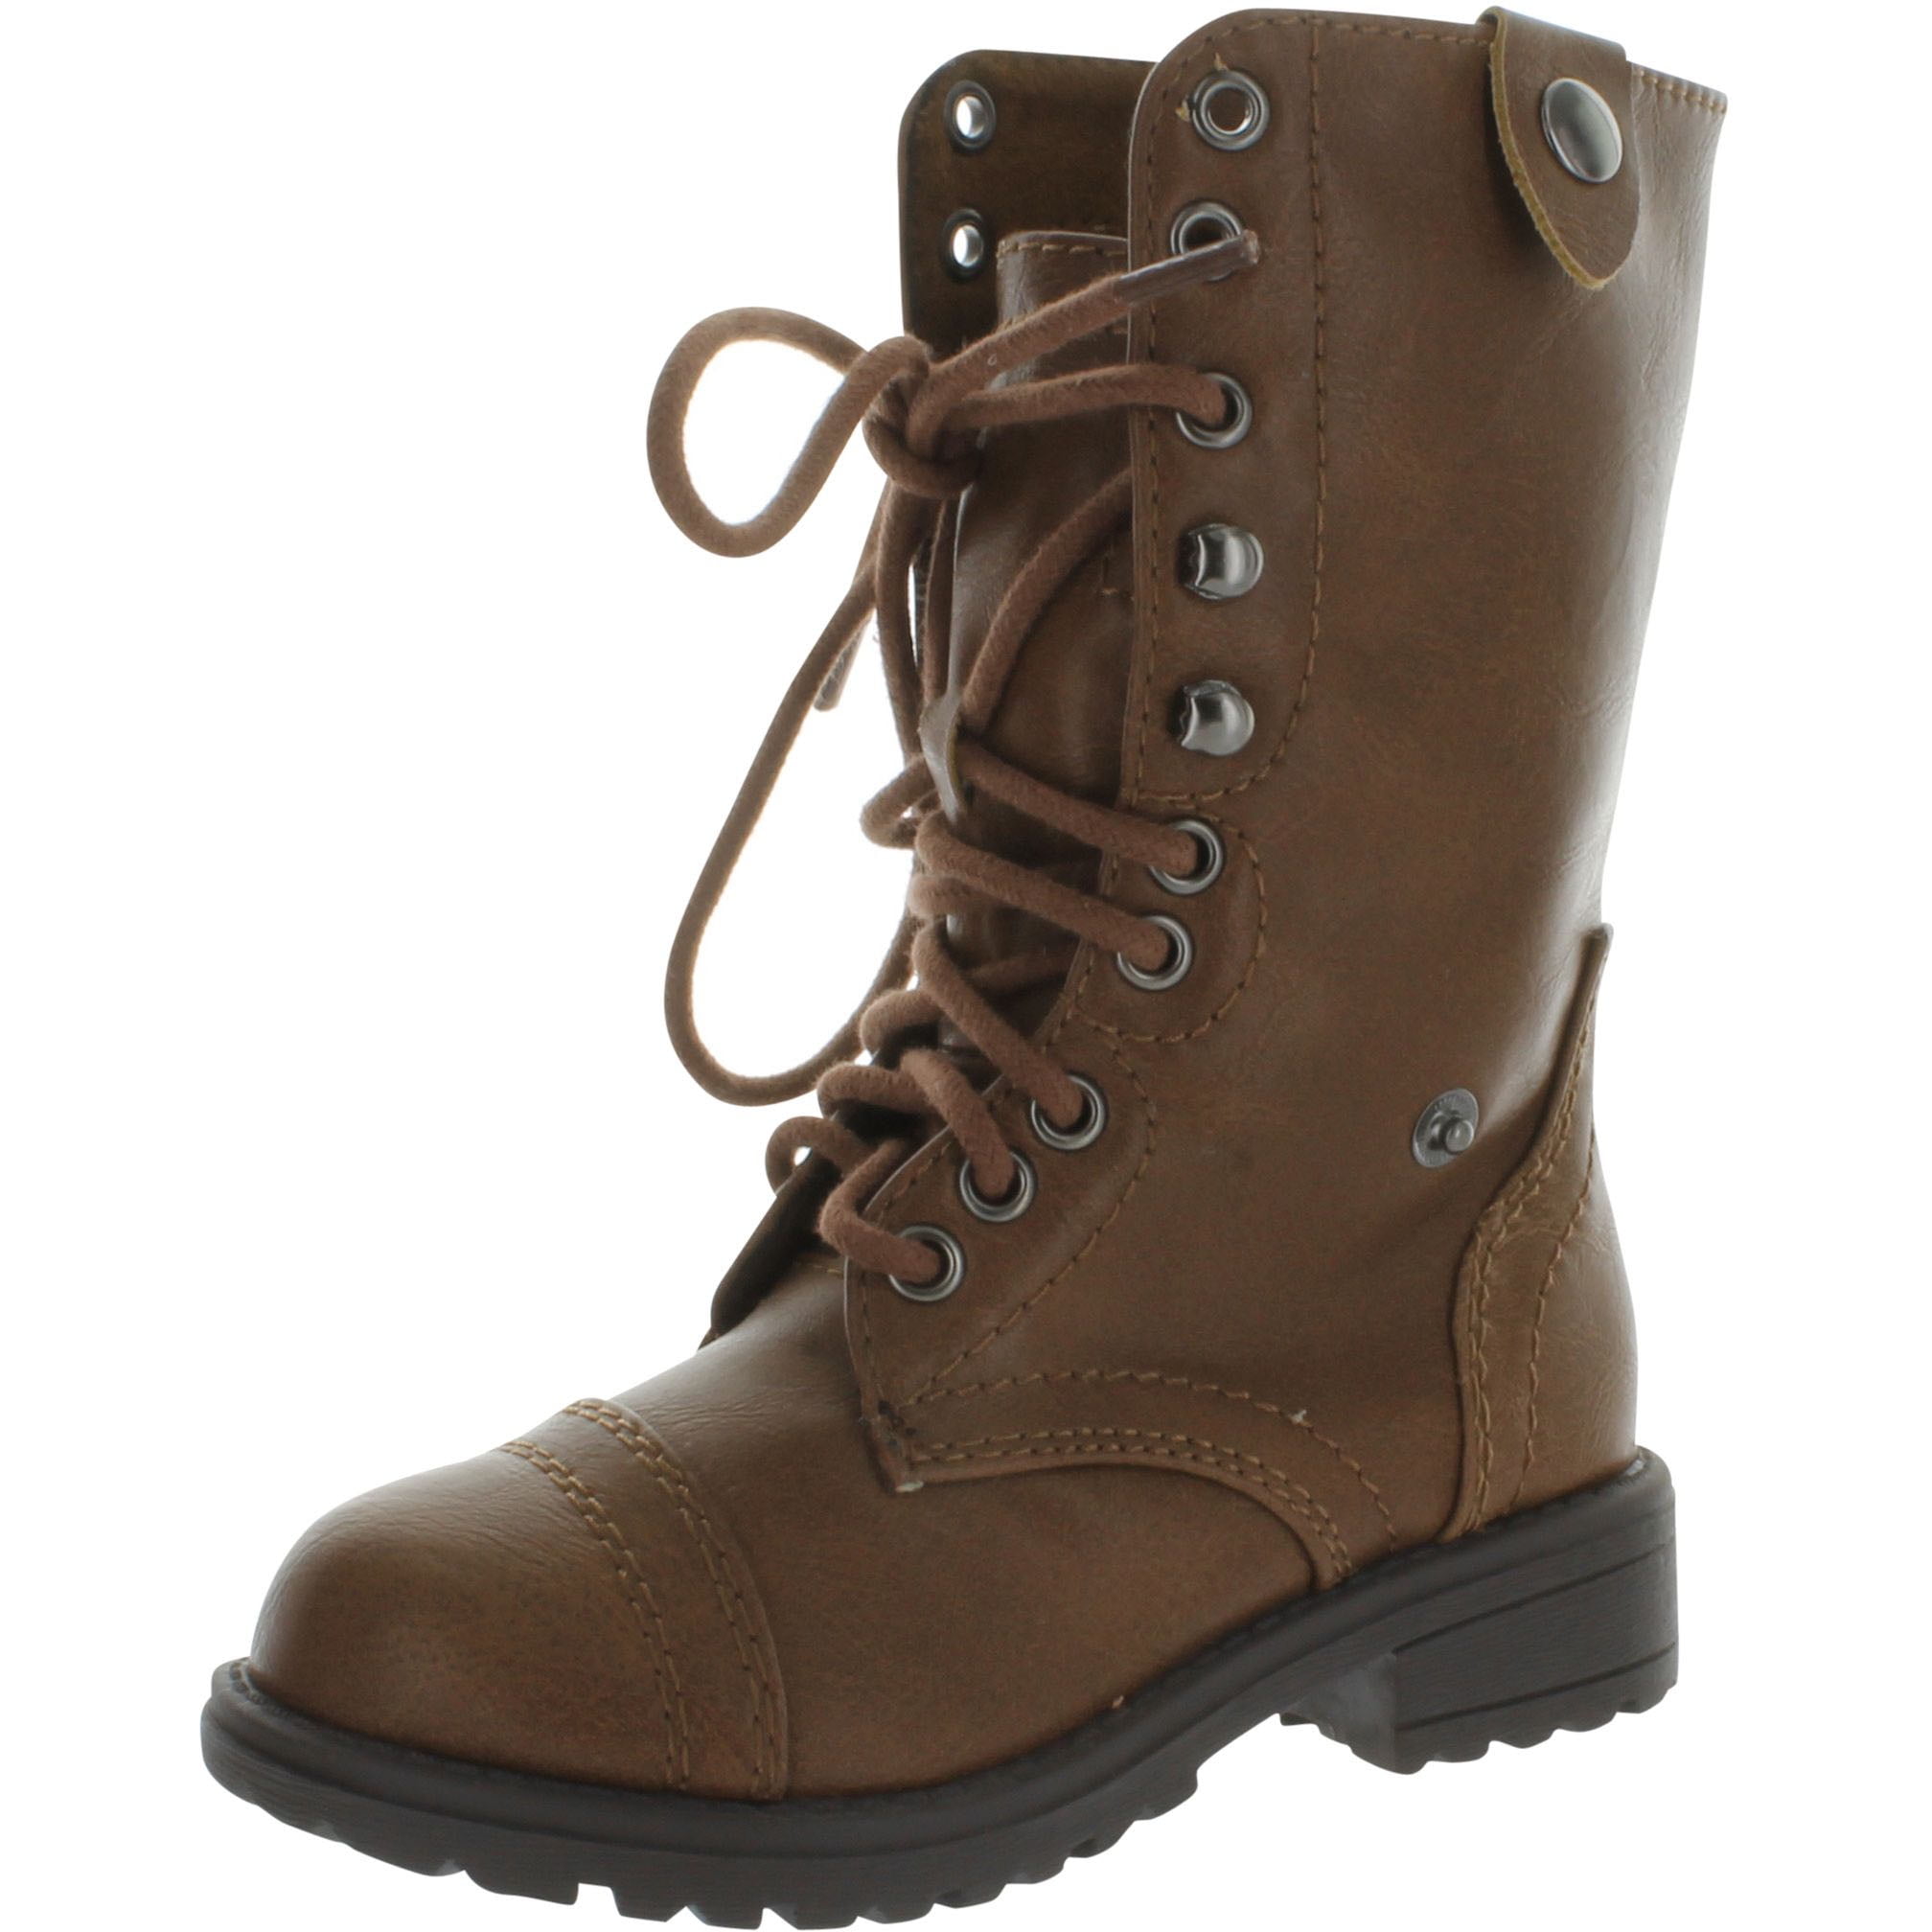 Soda Girl's Oralee Combat Military Boots with Camo - Walmart.com